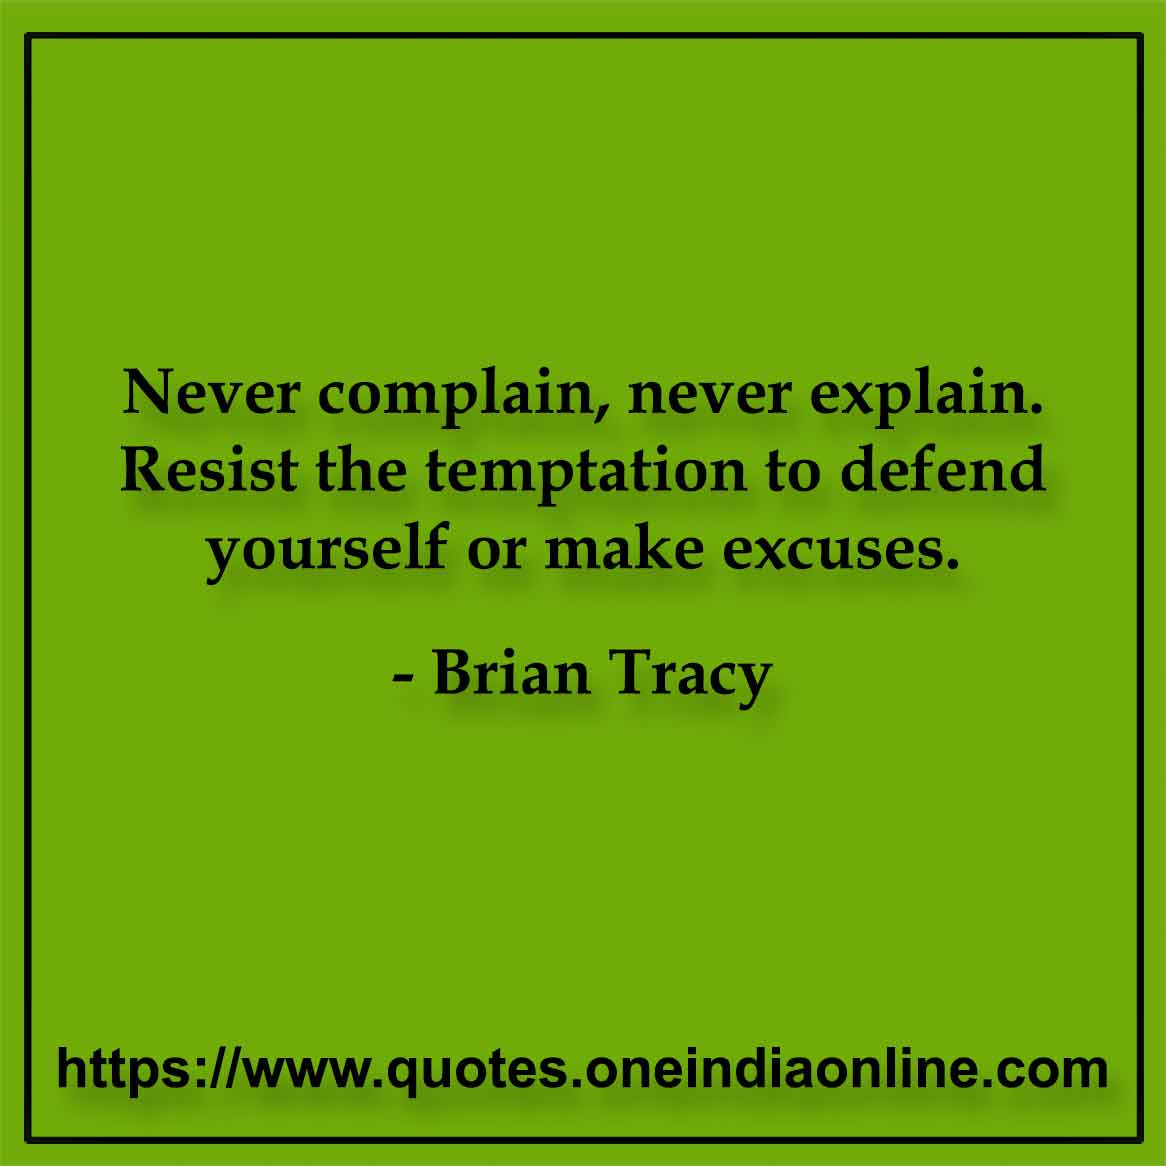 Never complain, never explain. Resist the temptation to defend yourself or make excuses.

- Brian Tracy